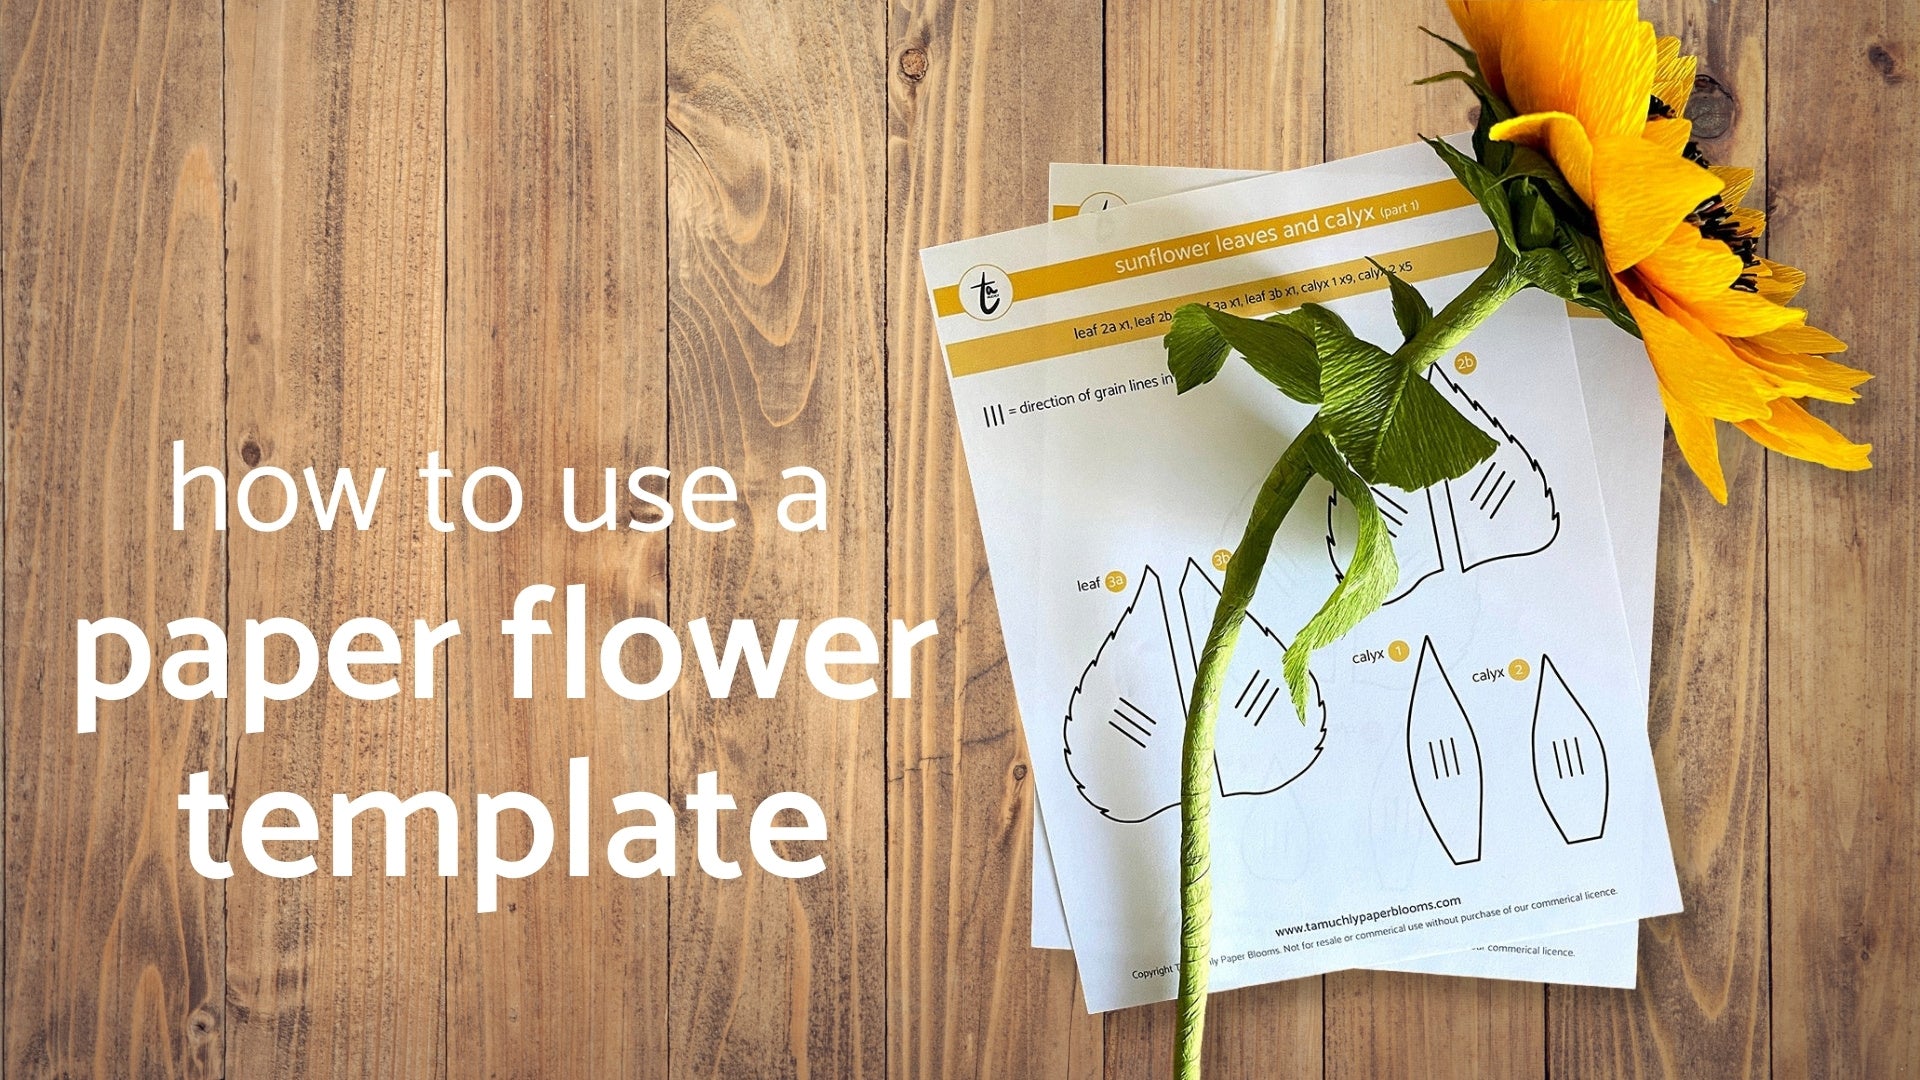 Load video: how to use a paper flower template